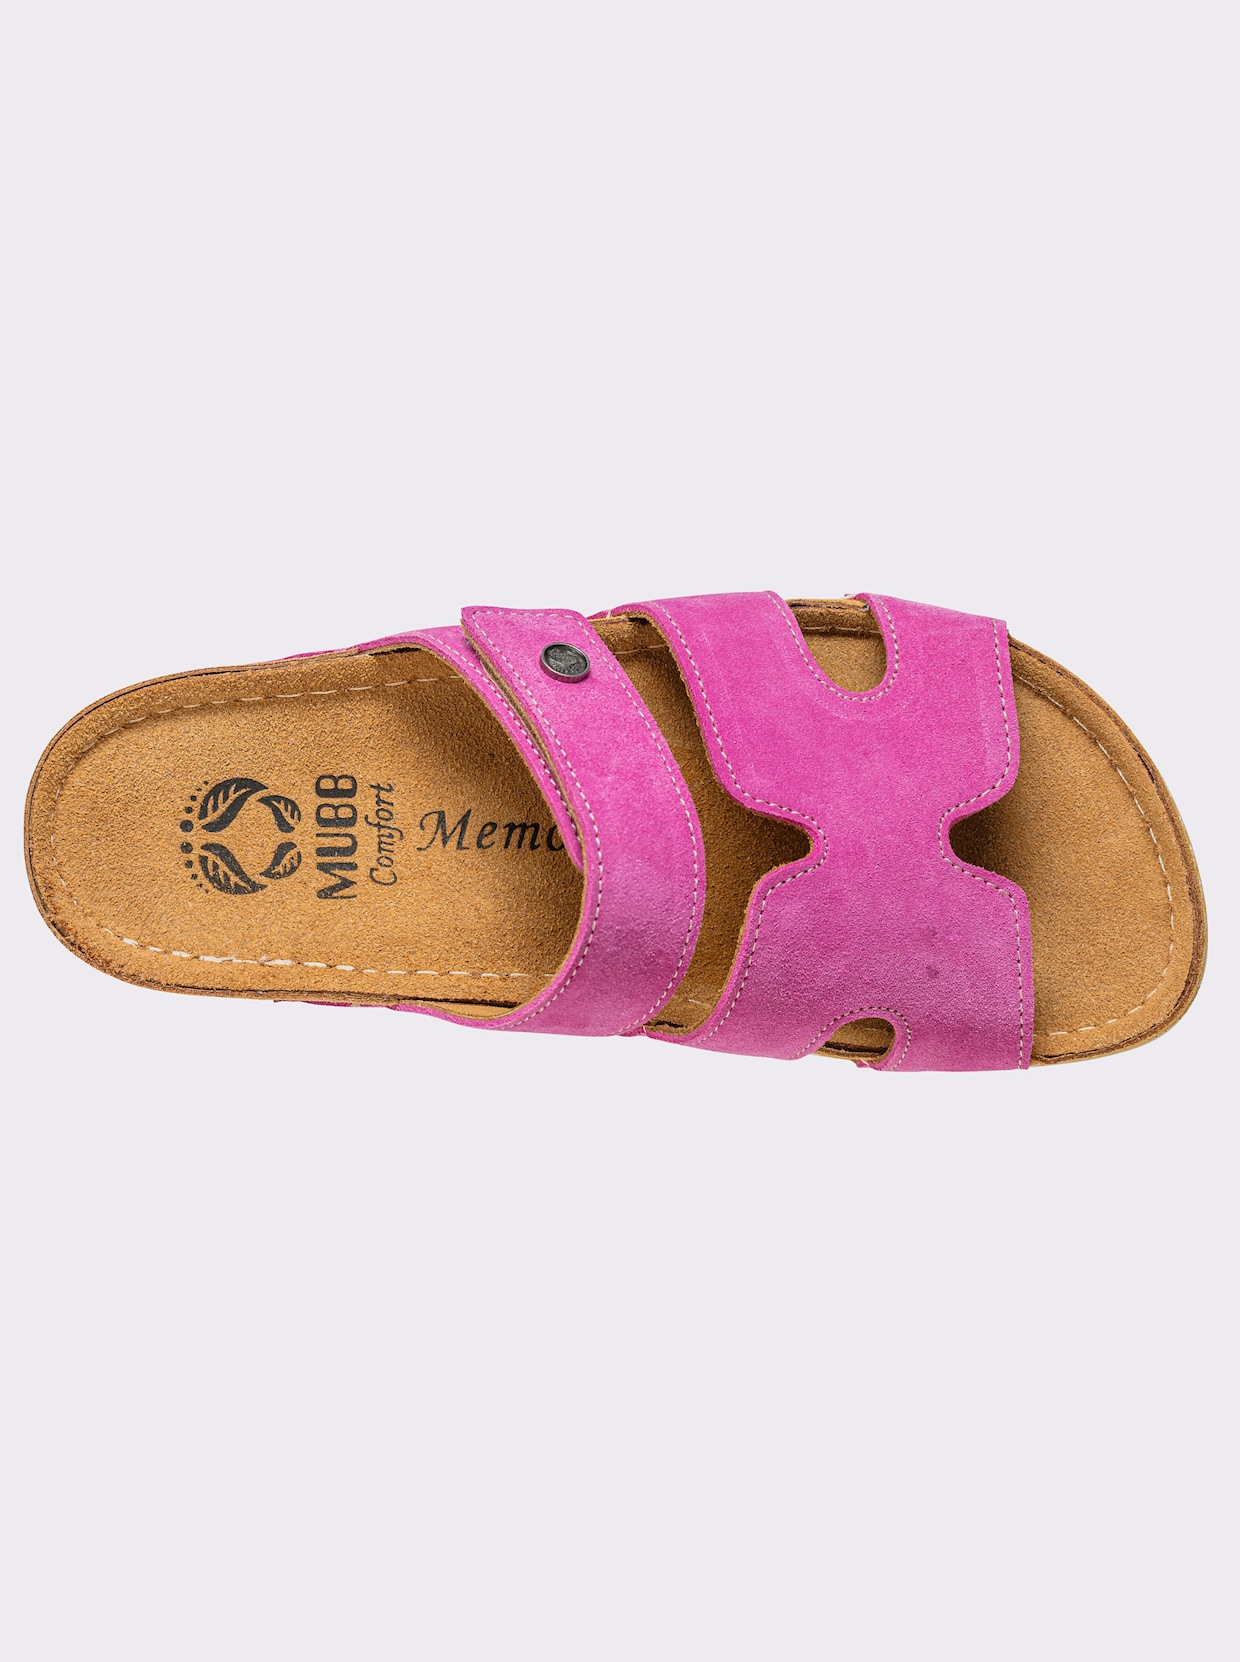 Mubb slippers - pink